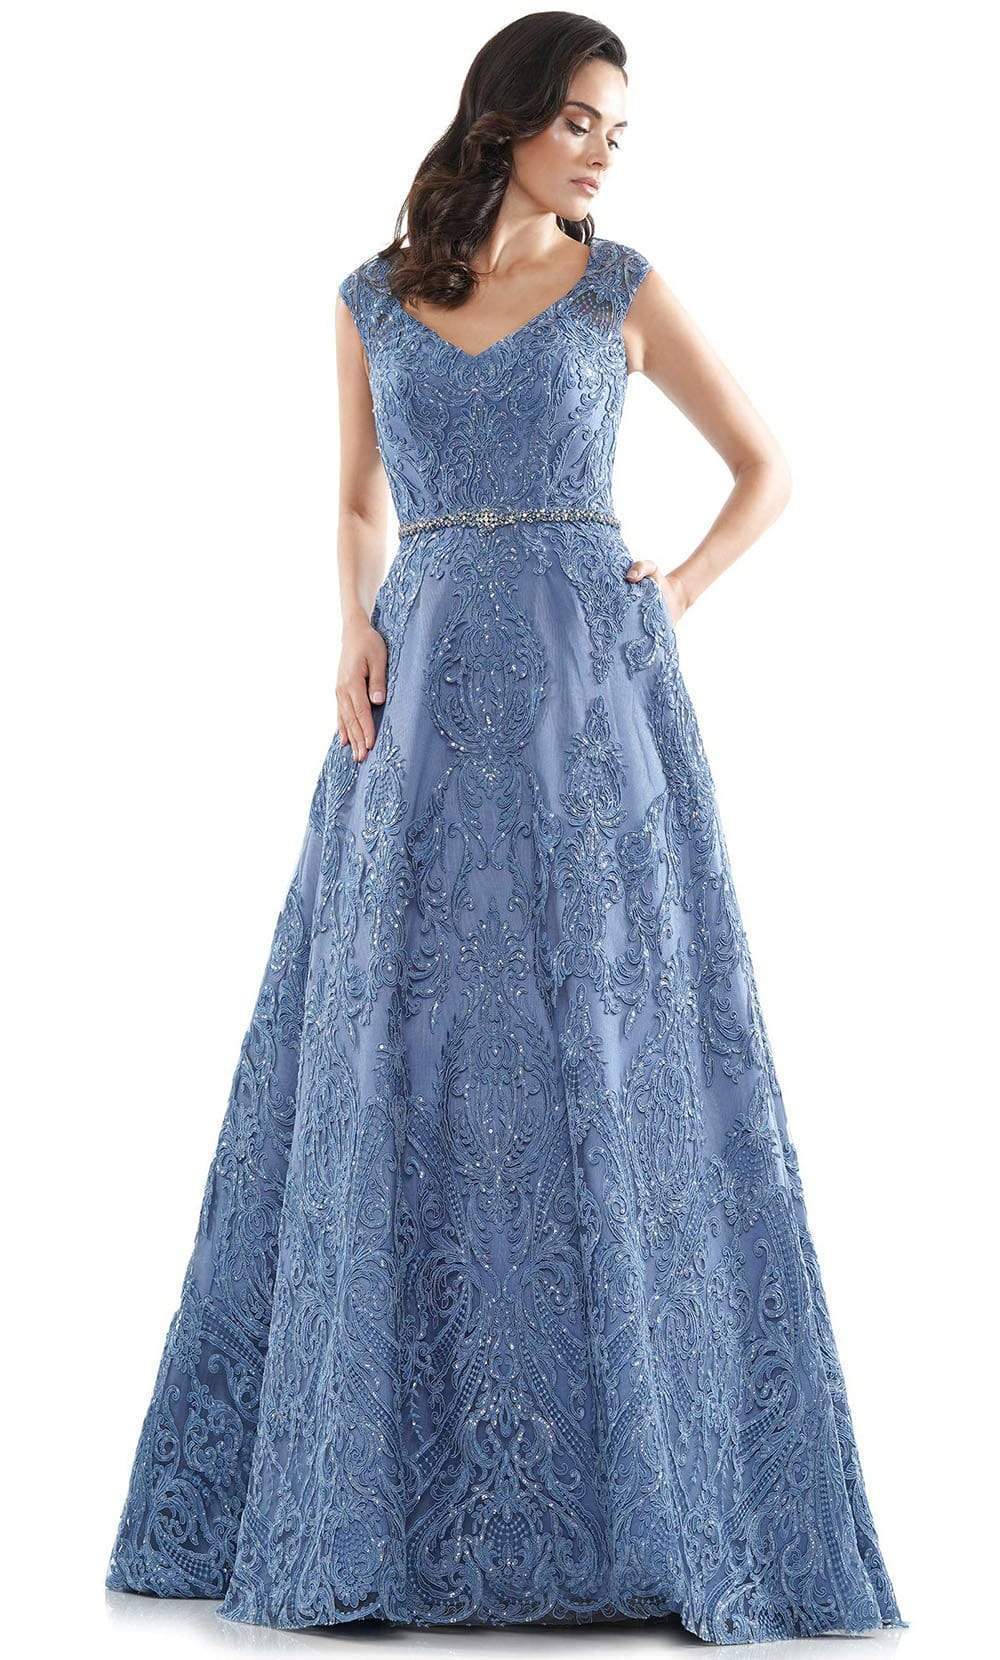 Marsoni by Colors - Jeweled Waist Embellished Evening Dress MV1092 In Blue